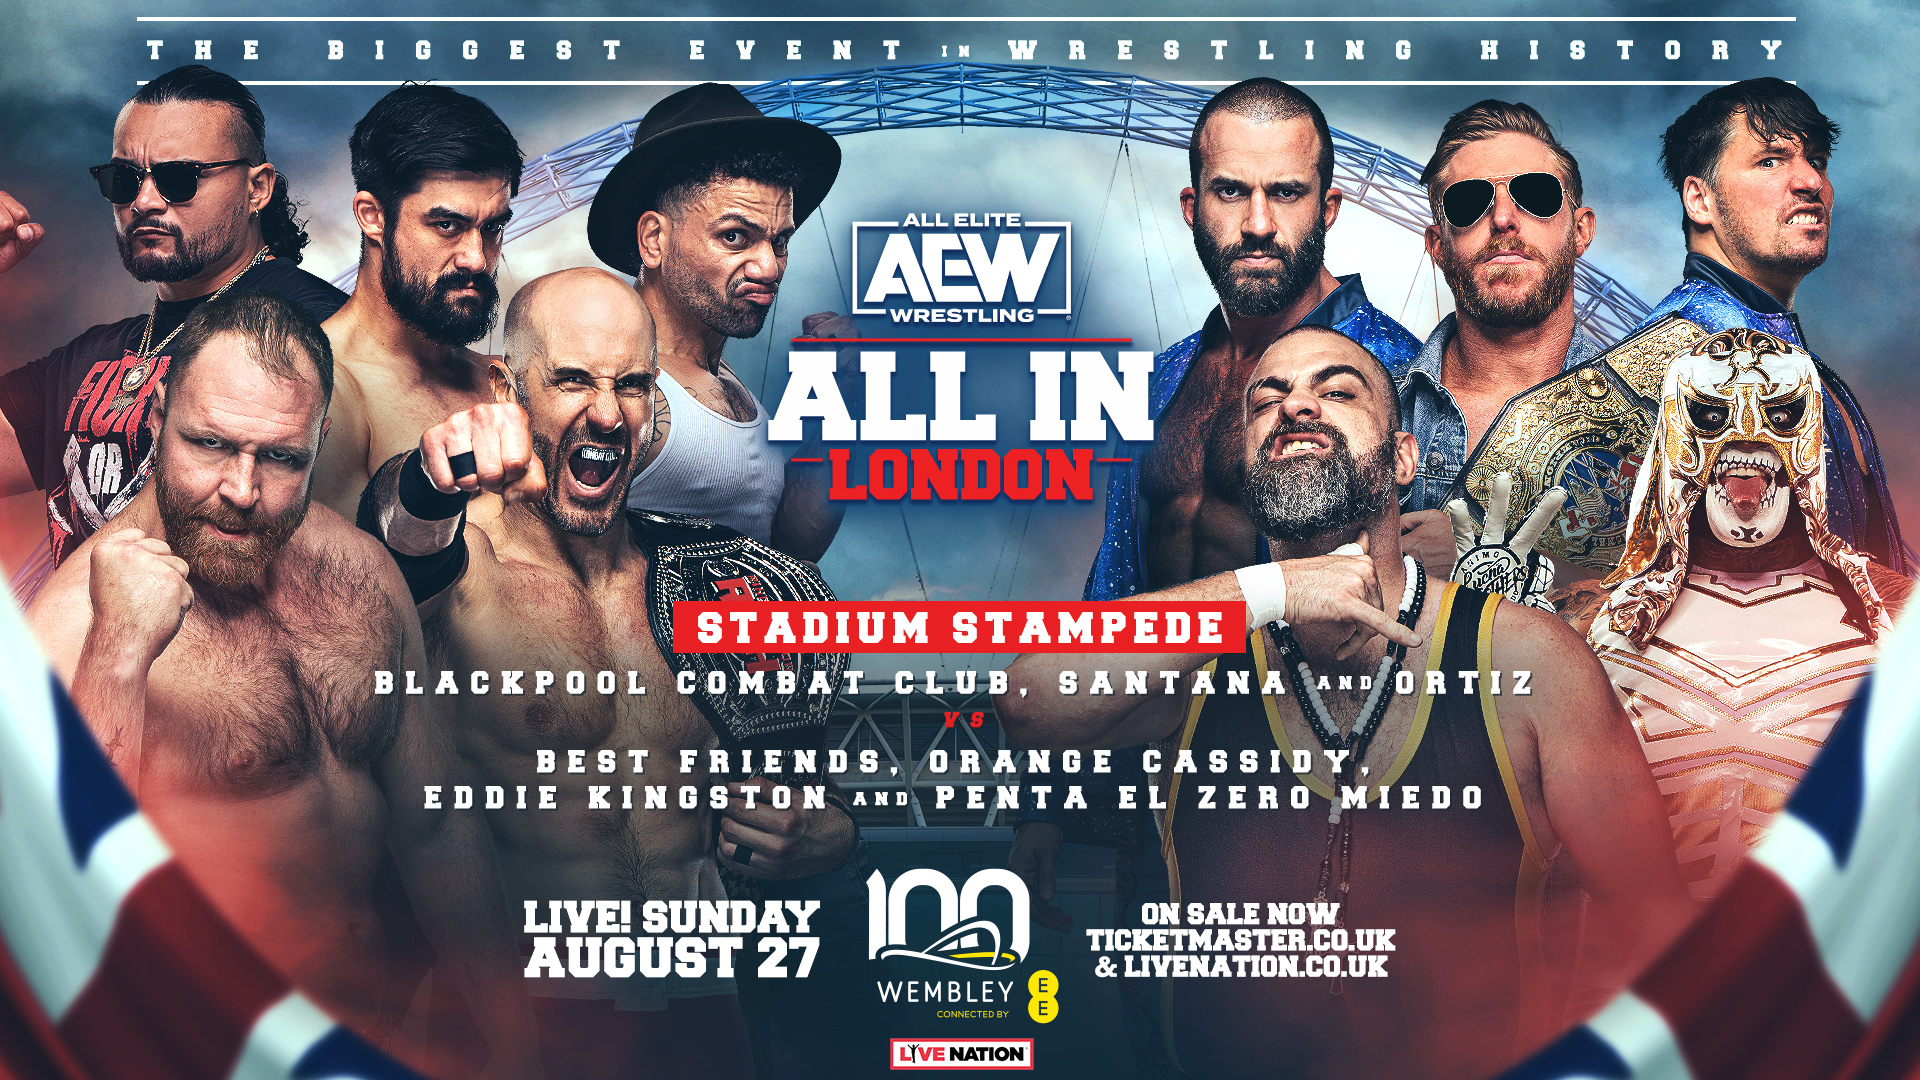 AEW All In London Stadium Stampede match graphic.